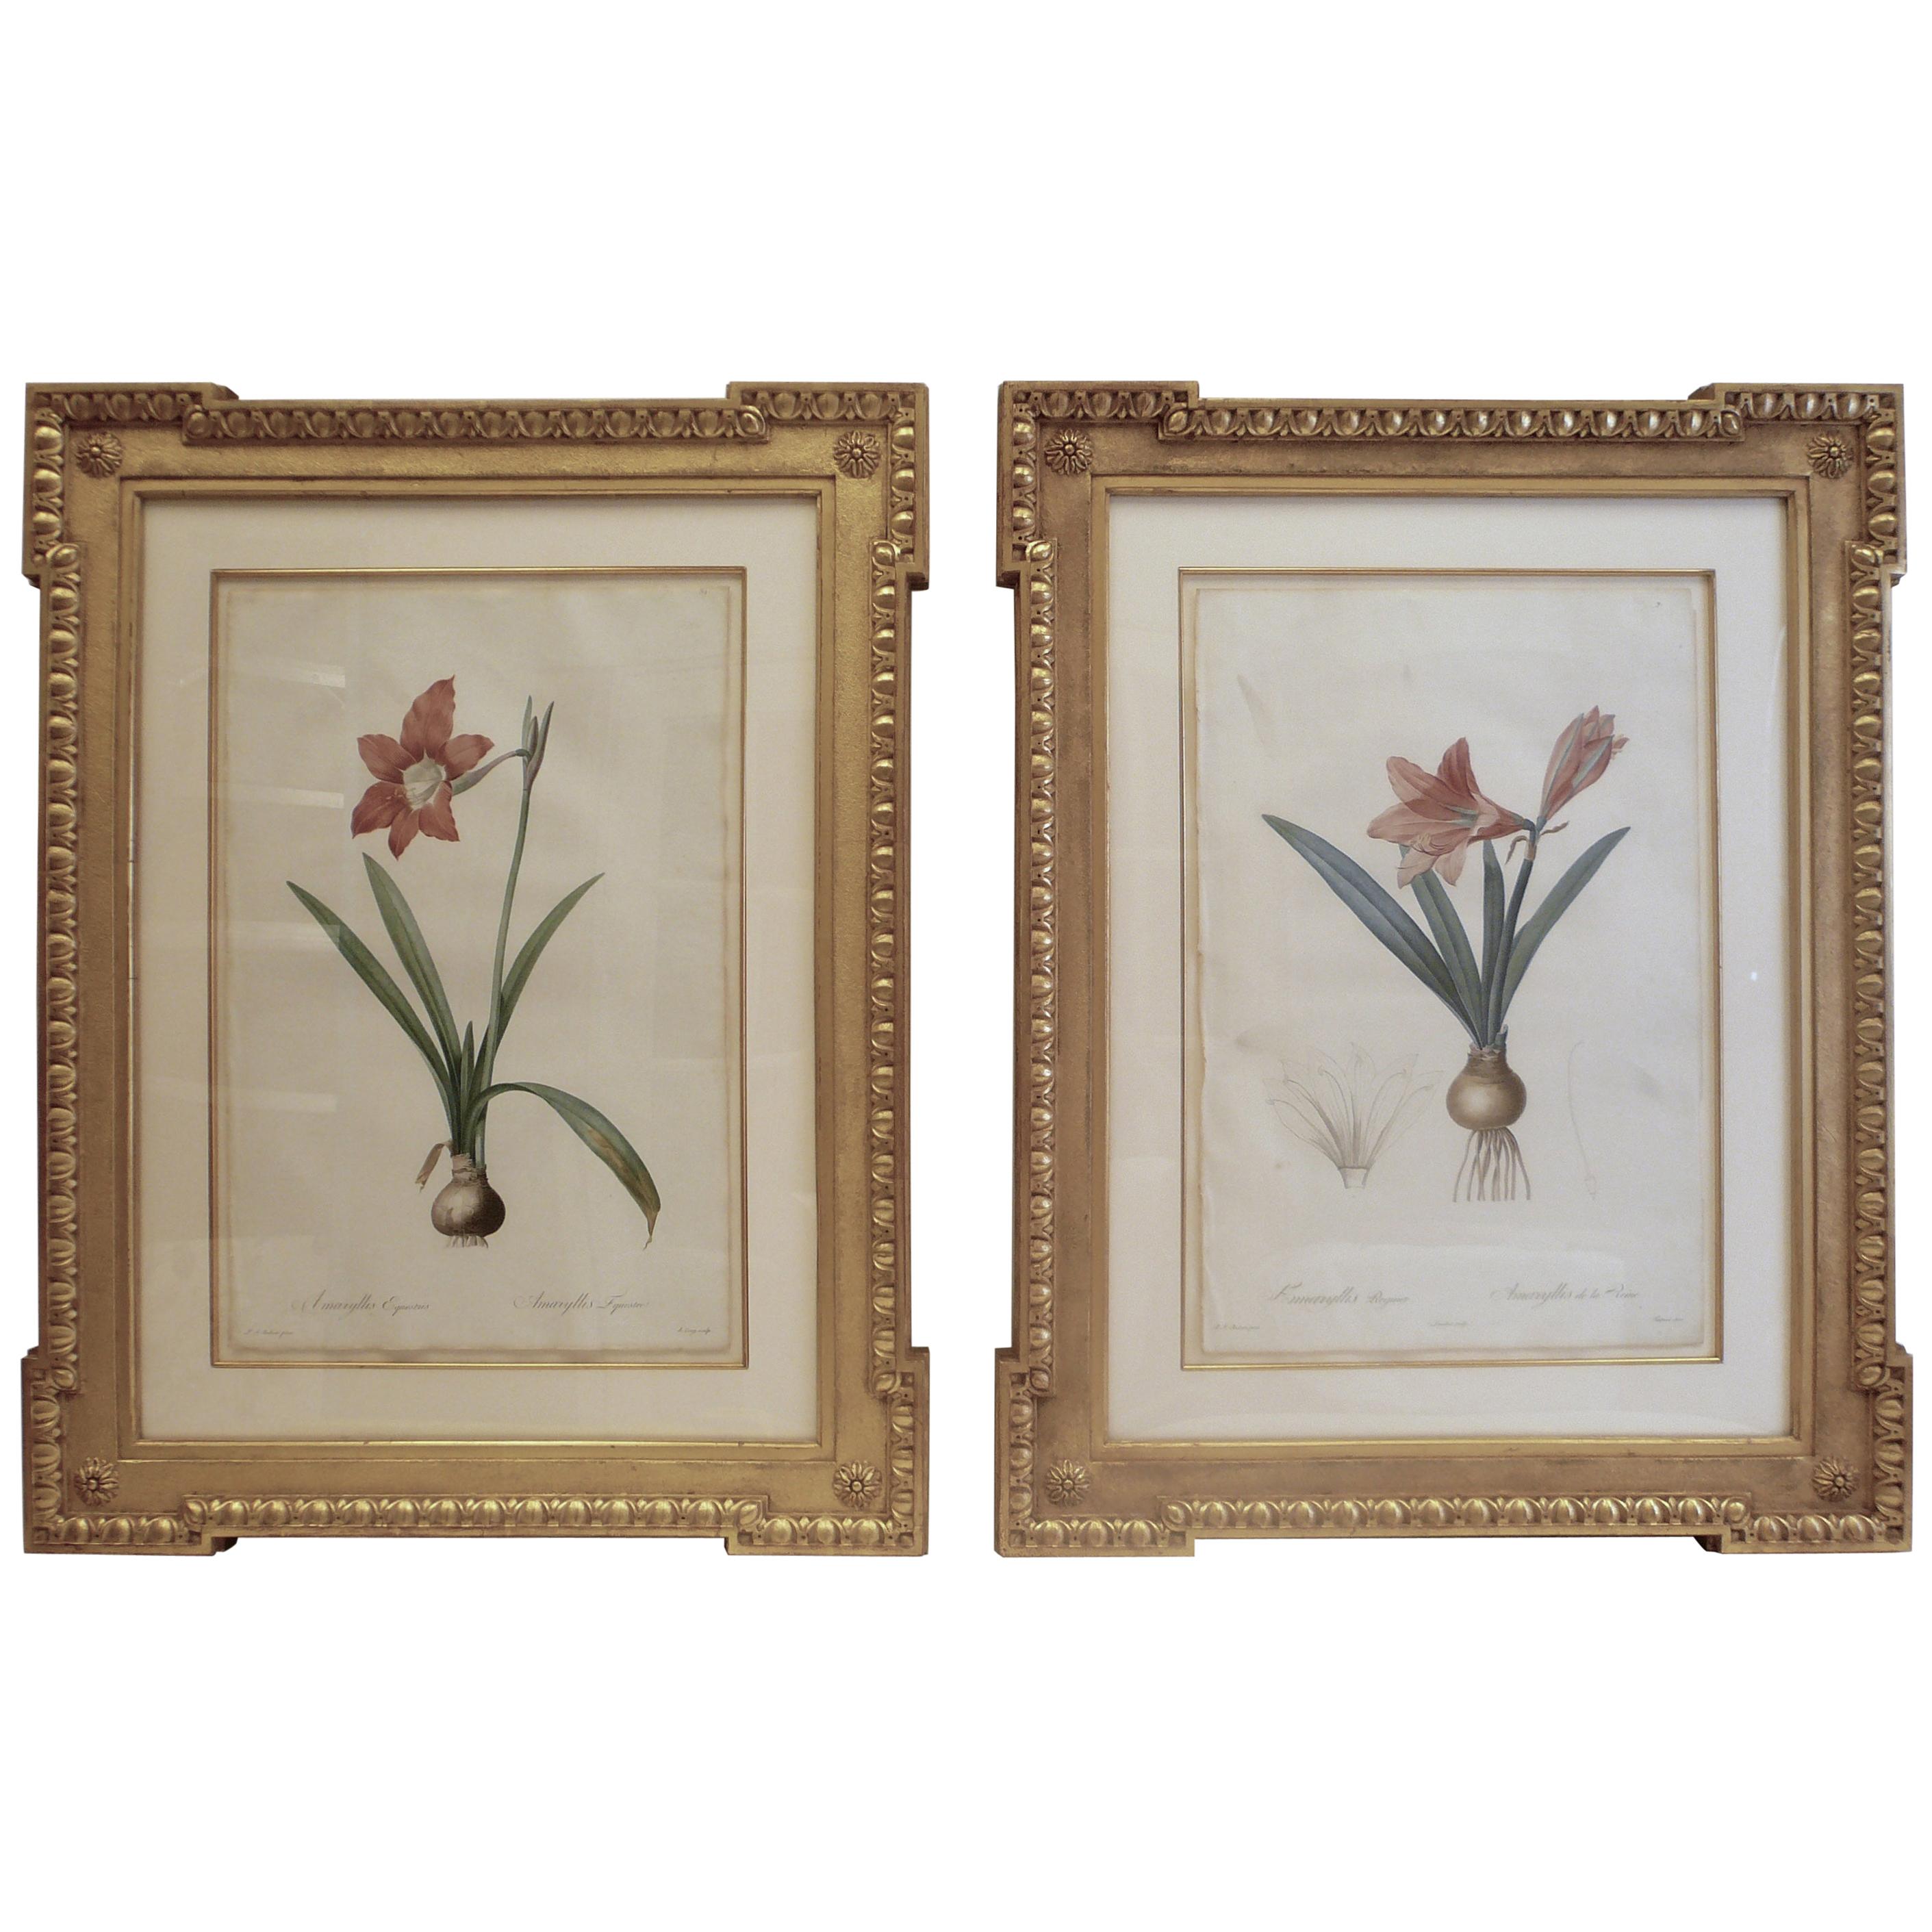 Four Botanical Engravings by Pierre Joseph Redoute